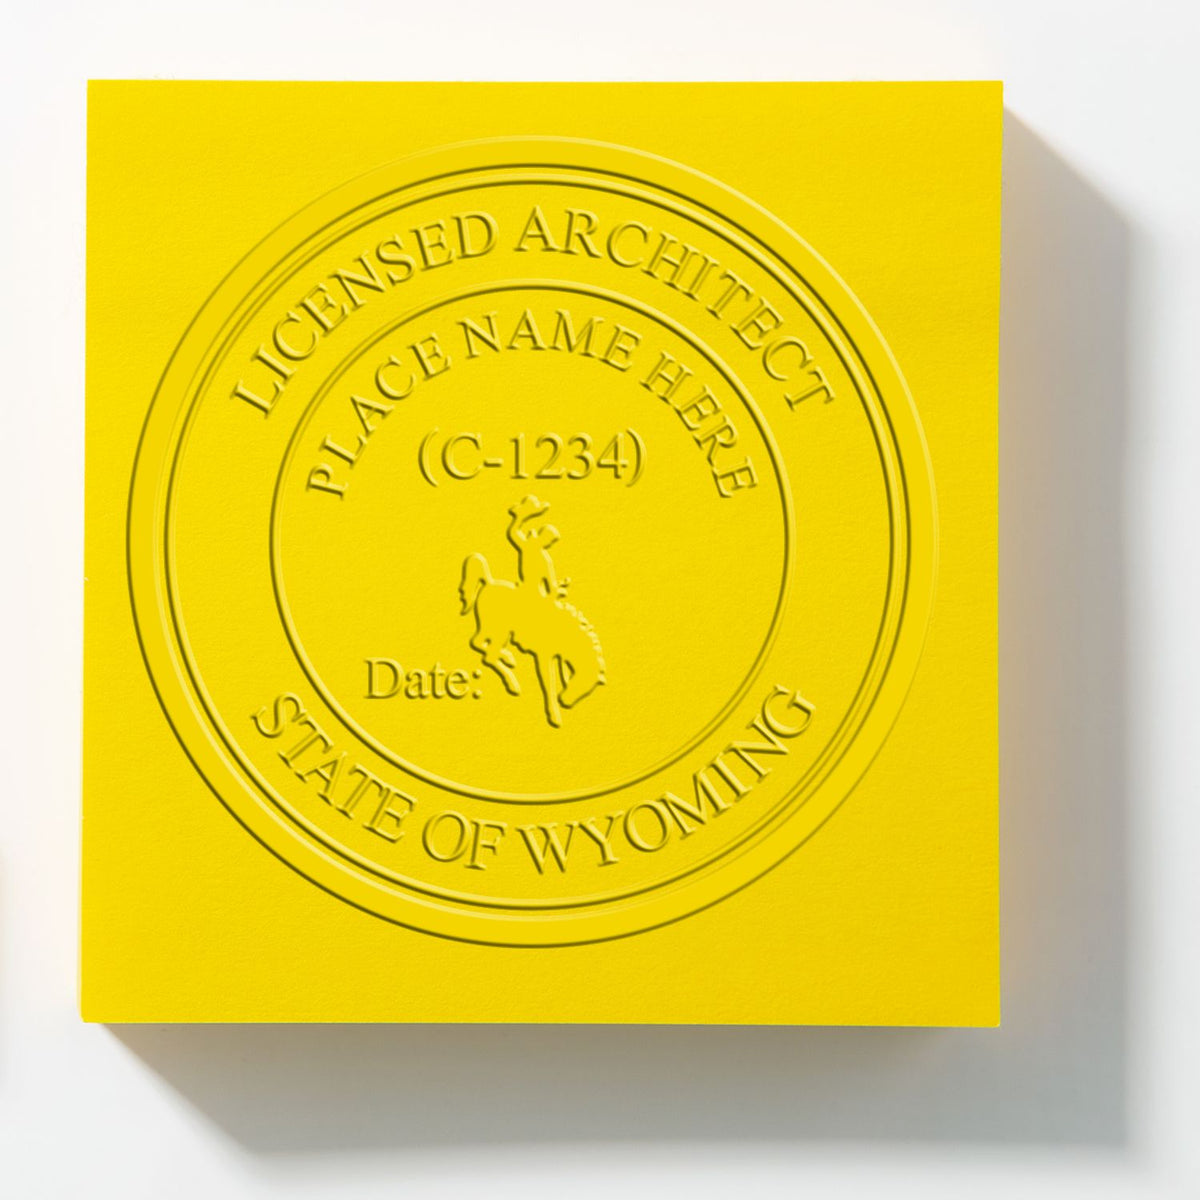 The Wyoming Desk Architect Embossing Seal stamp impression comes to life with a crisp, detailed photo on paper - showcasing true professional quality.